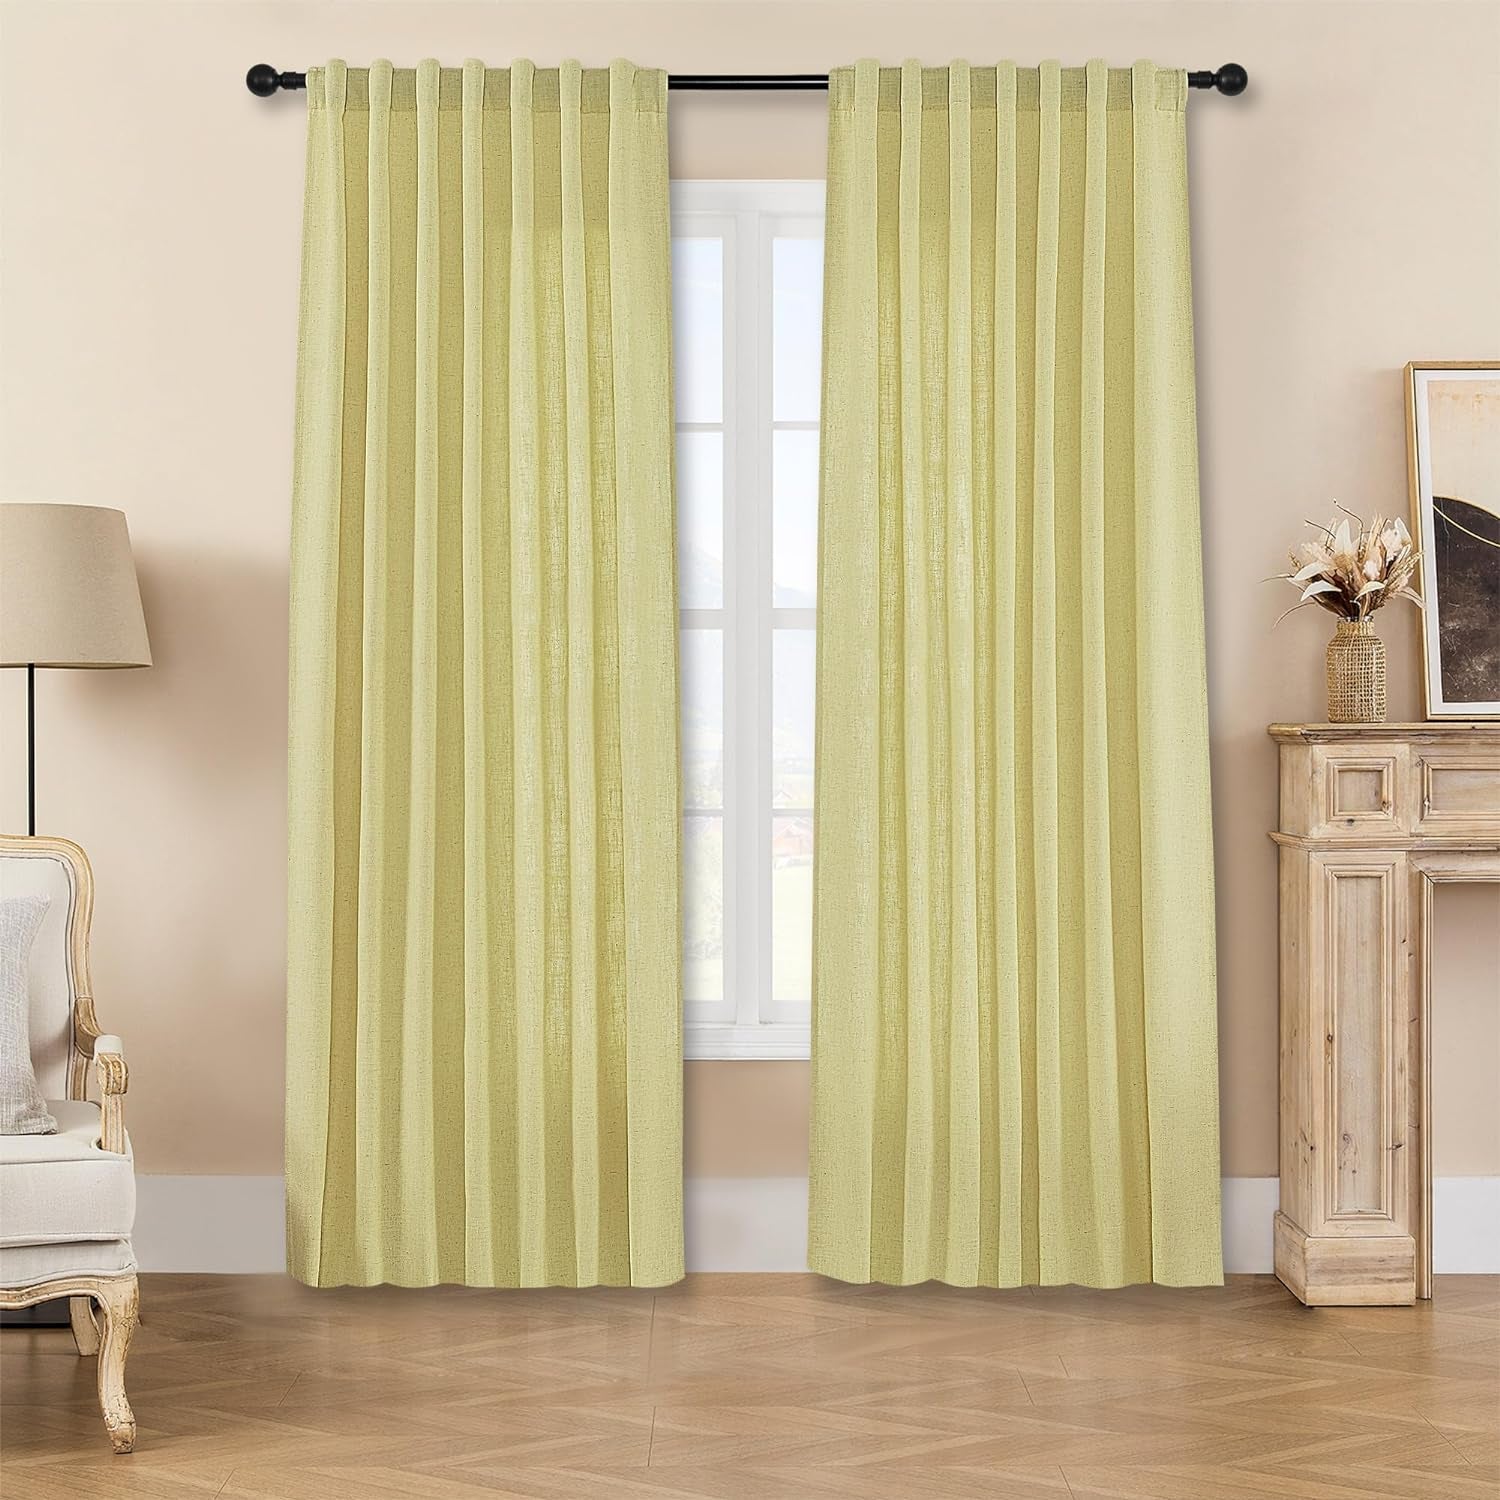 Joydeco Linen Curtains 96 Inch Length 2 Panels Set, Curtains for Living Room, Light Filtering Curtains 96 Inches Long, Living Room Curtains 96 Inches Long  Joydeco   